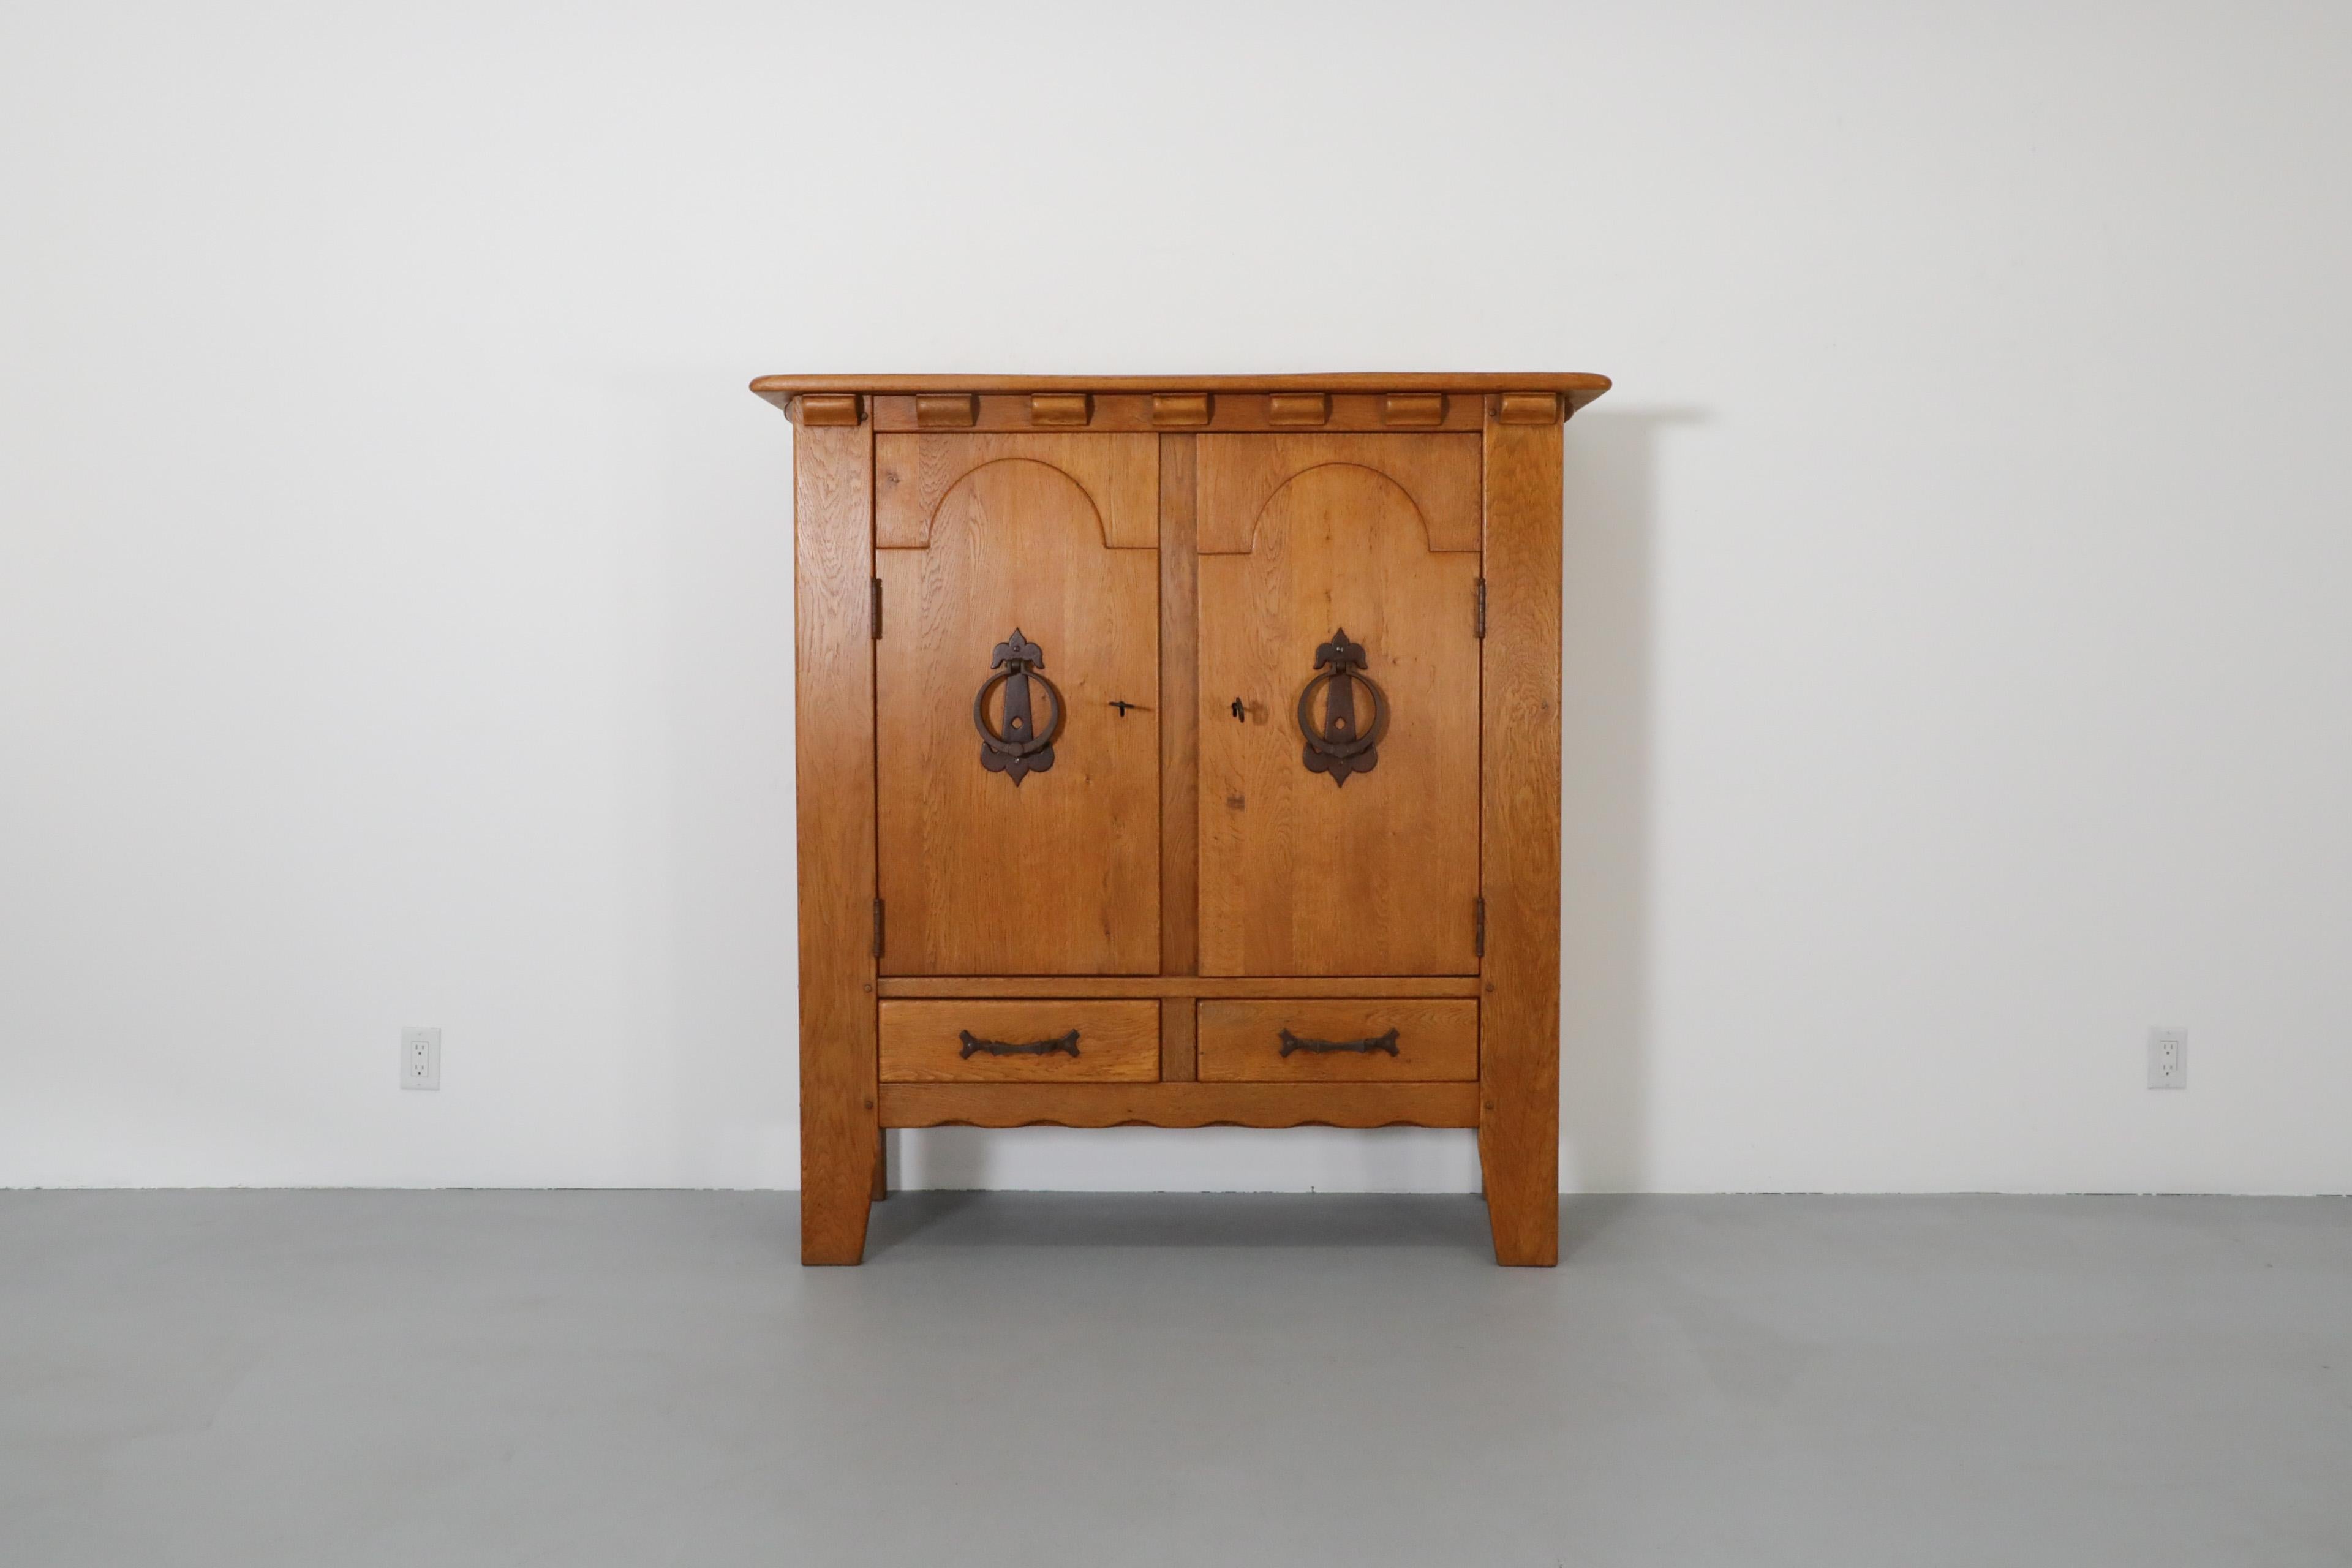 Mid-Century Guillerme et Chambron Inspired solid oak sideboard by Sprij Meubelen. This large, high sideboard has two doors concealing two sizable storage spaces above two pull-out lower drawers for additional storage. The decoratively carved oak is